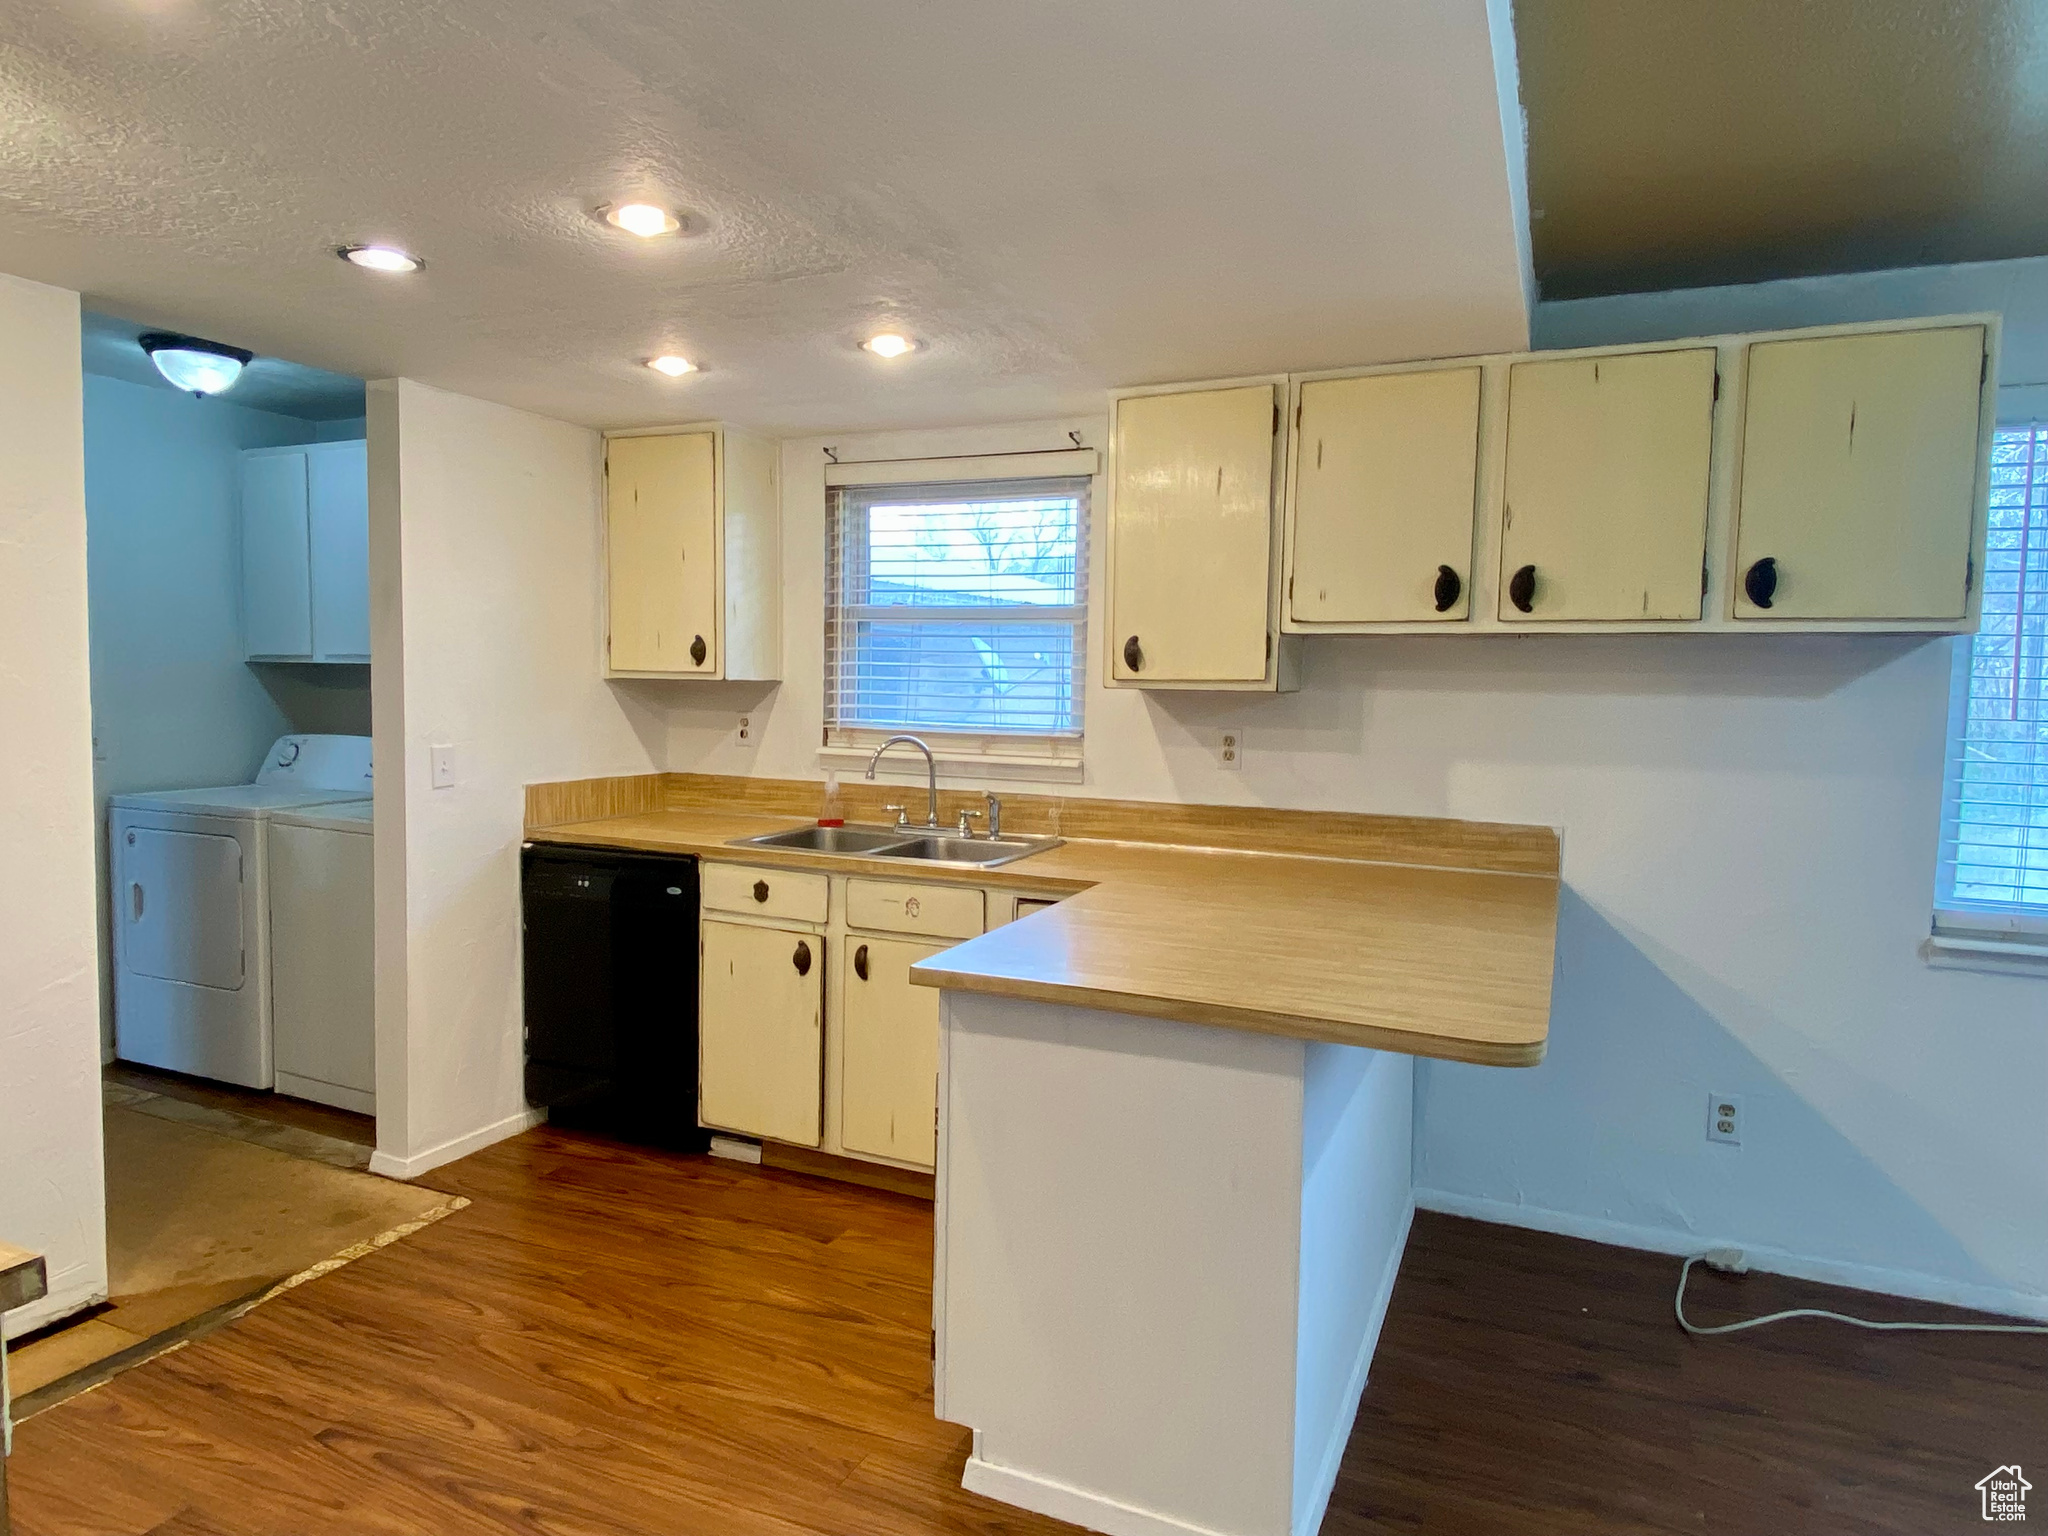 Kitchen with dark wood-type flooring, washer and clothes dryer, black dishwasher, and sink